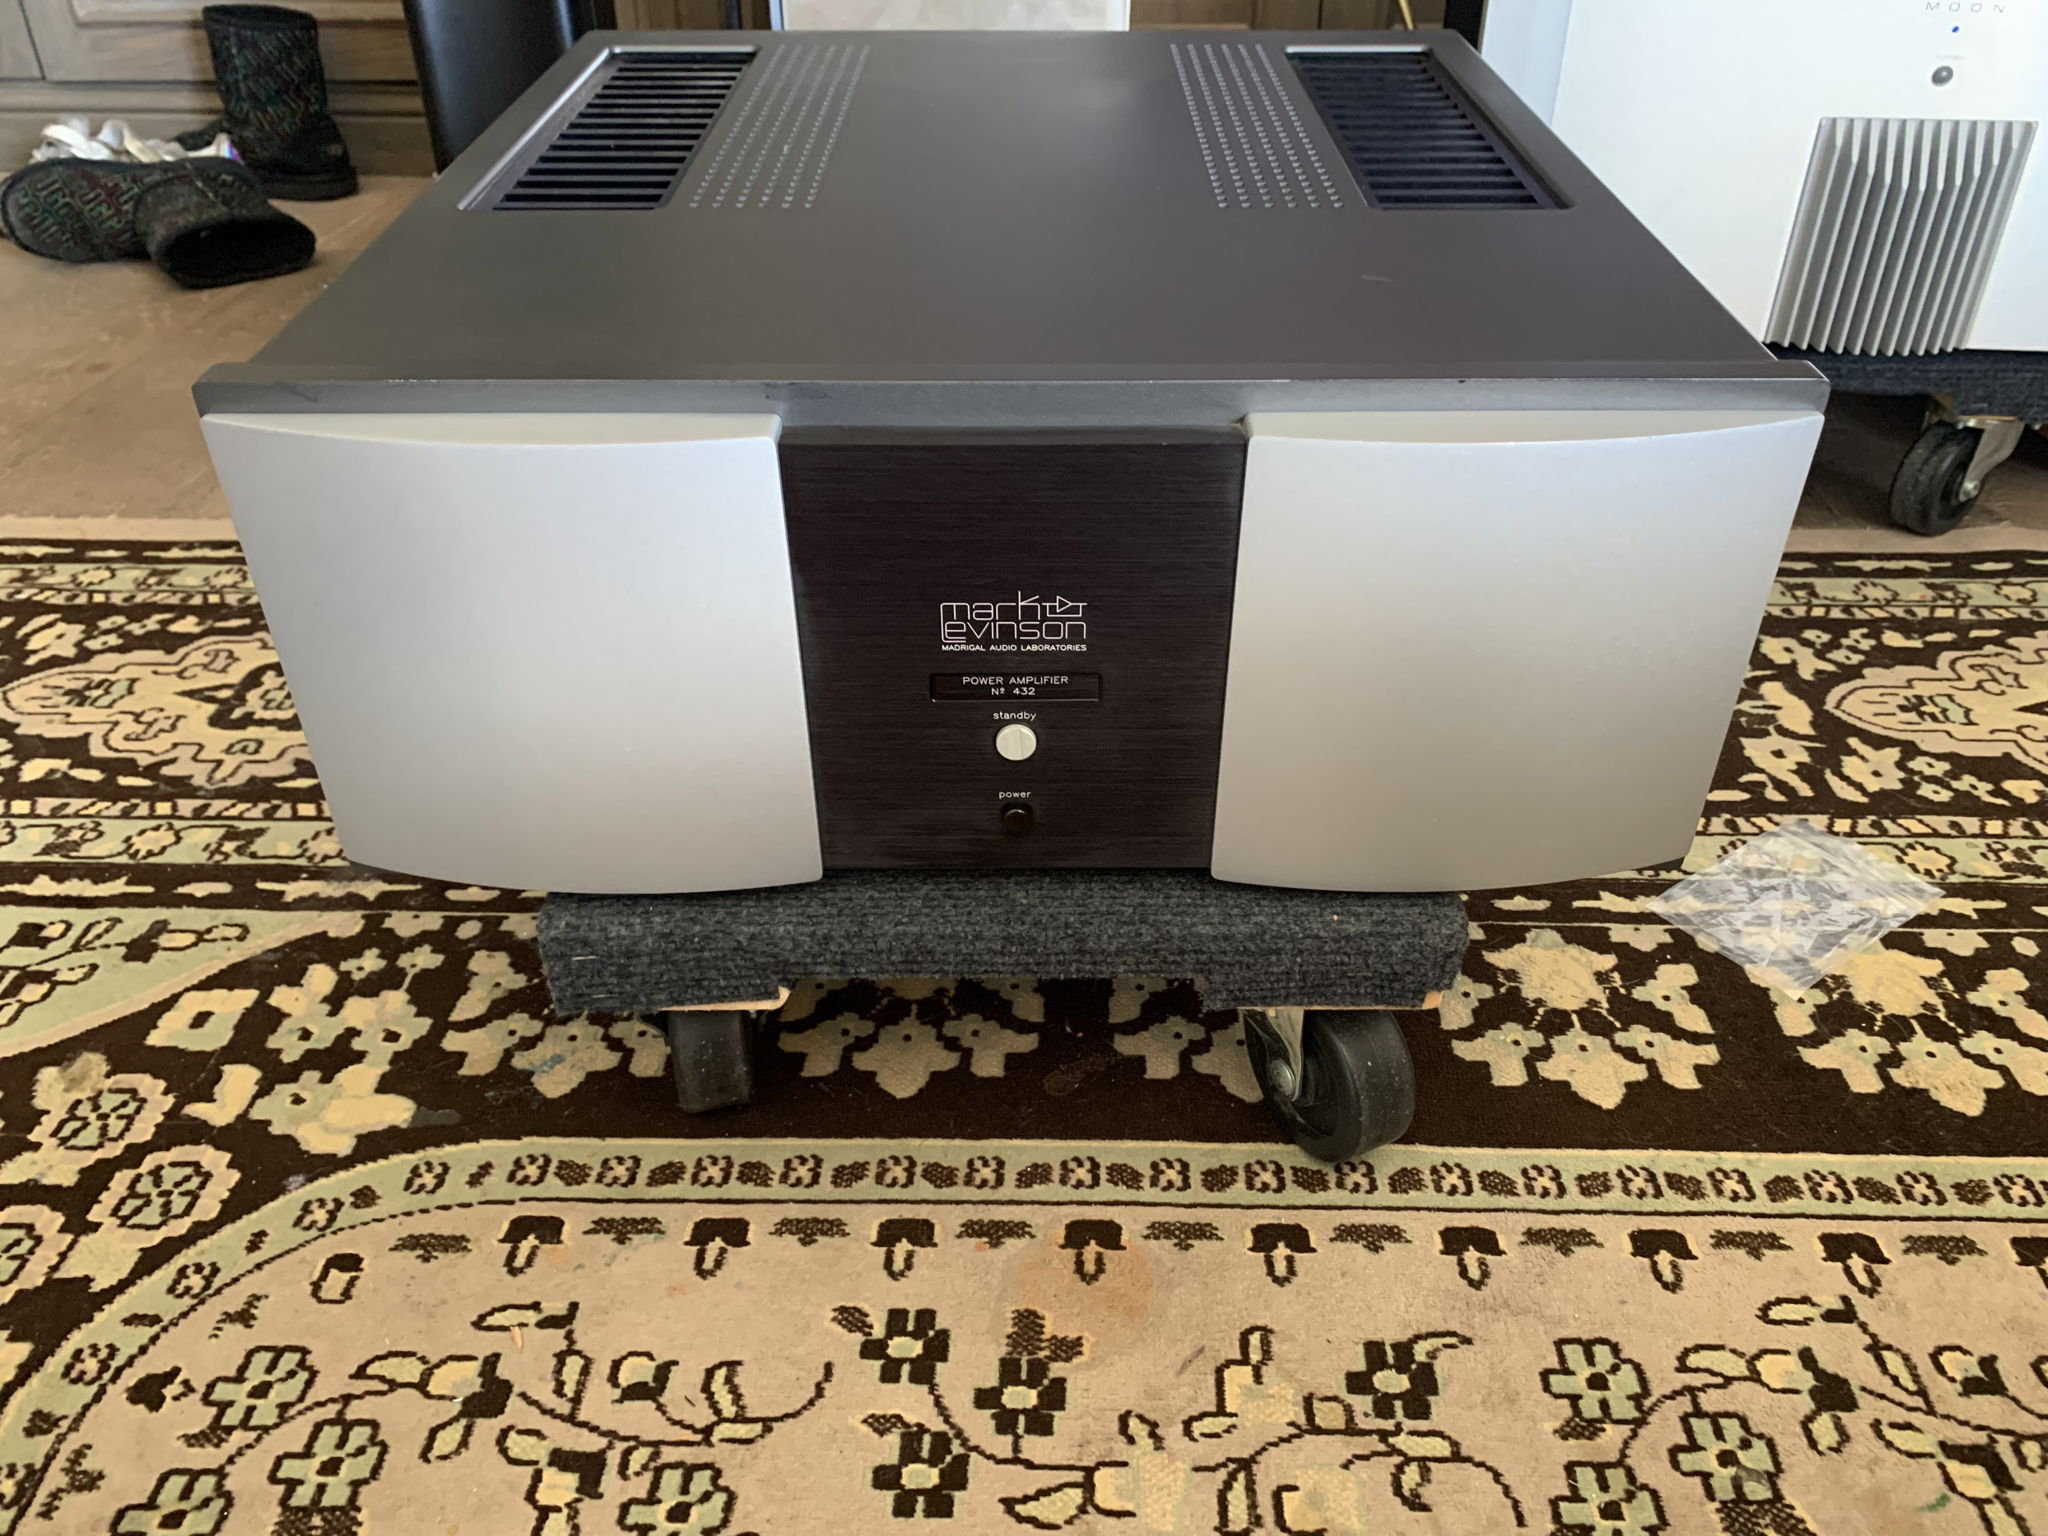 Mark Levinson No 432 Extremely Clean inside and out 12